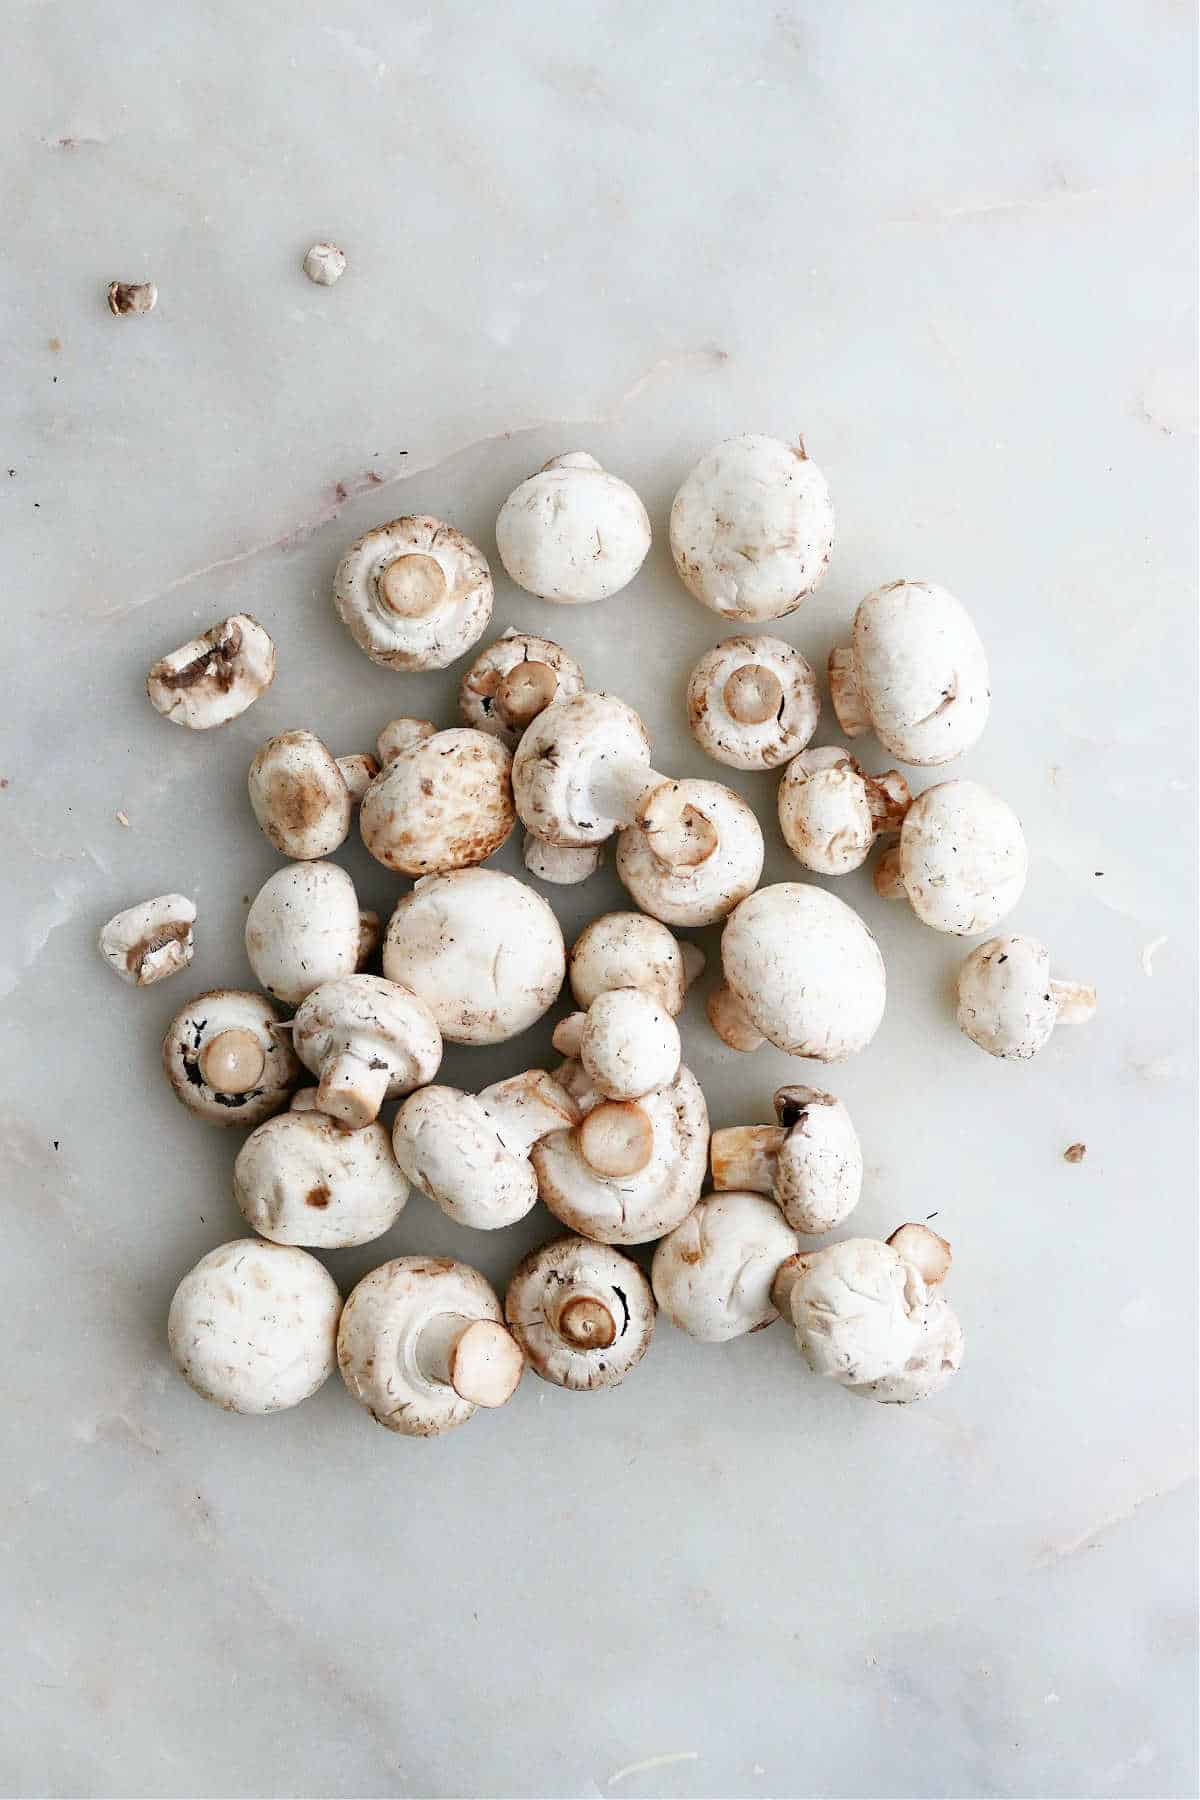 fresh white button mushrooms spread out on a counter